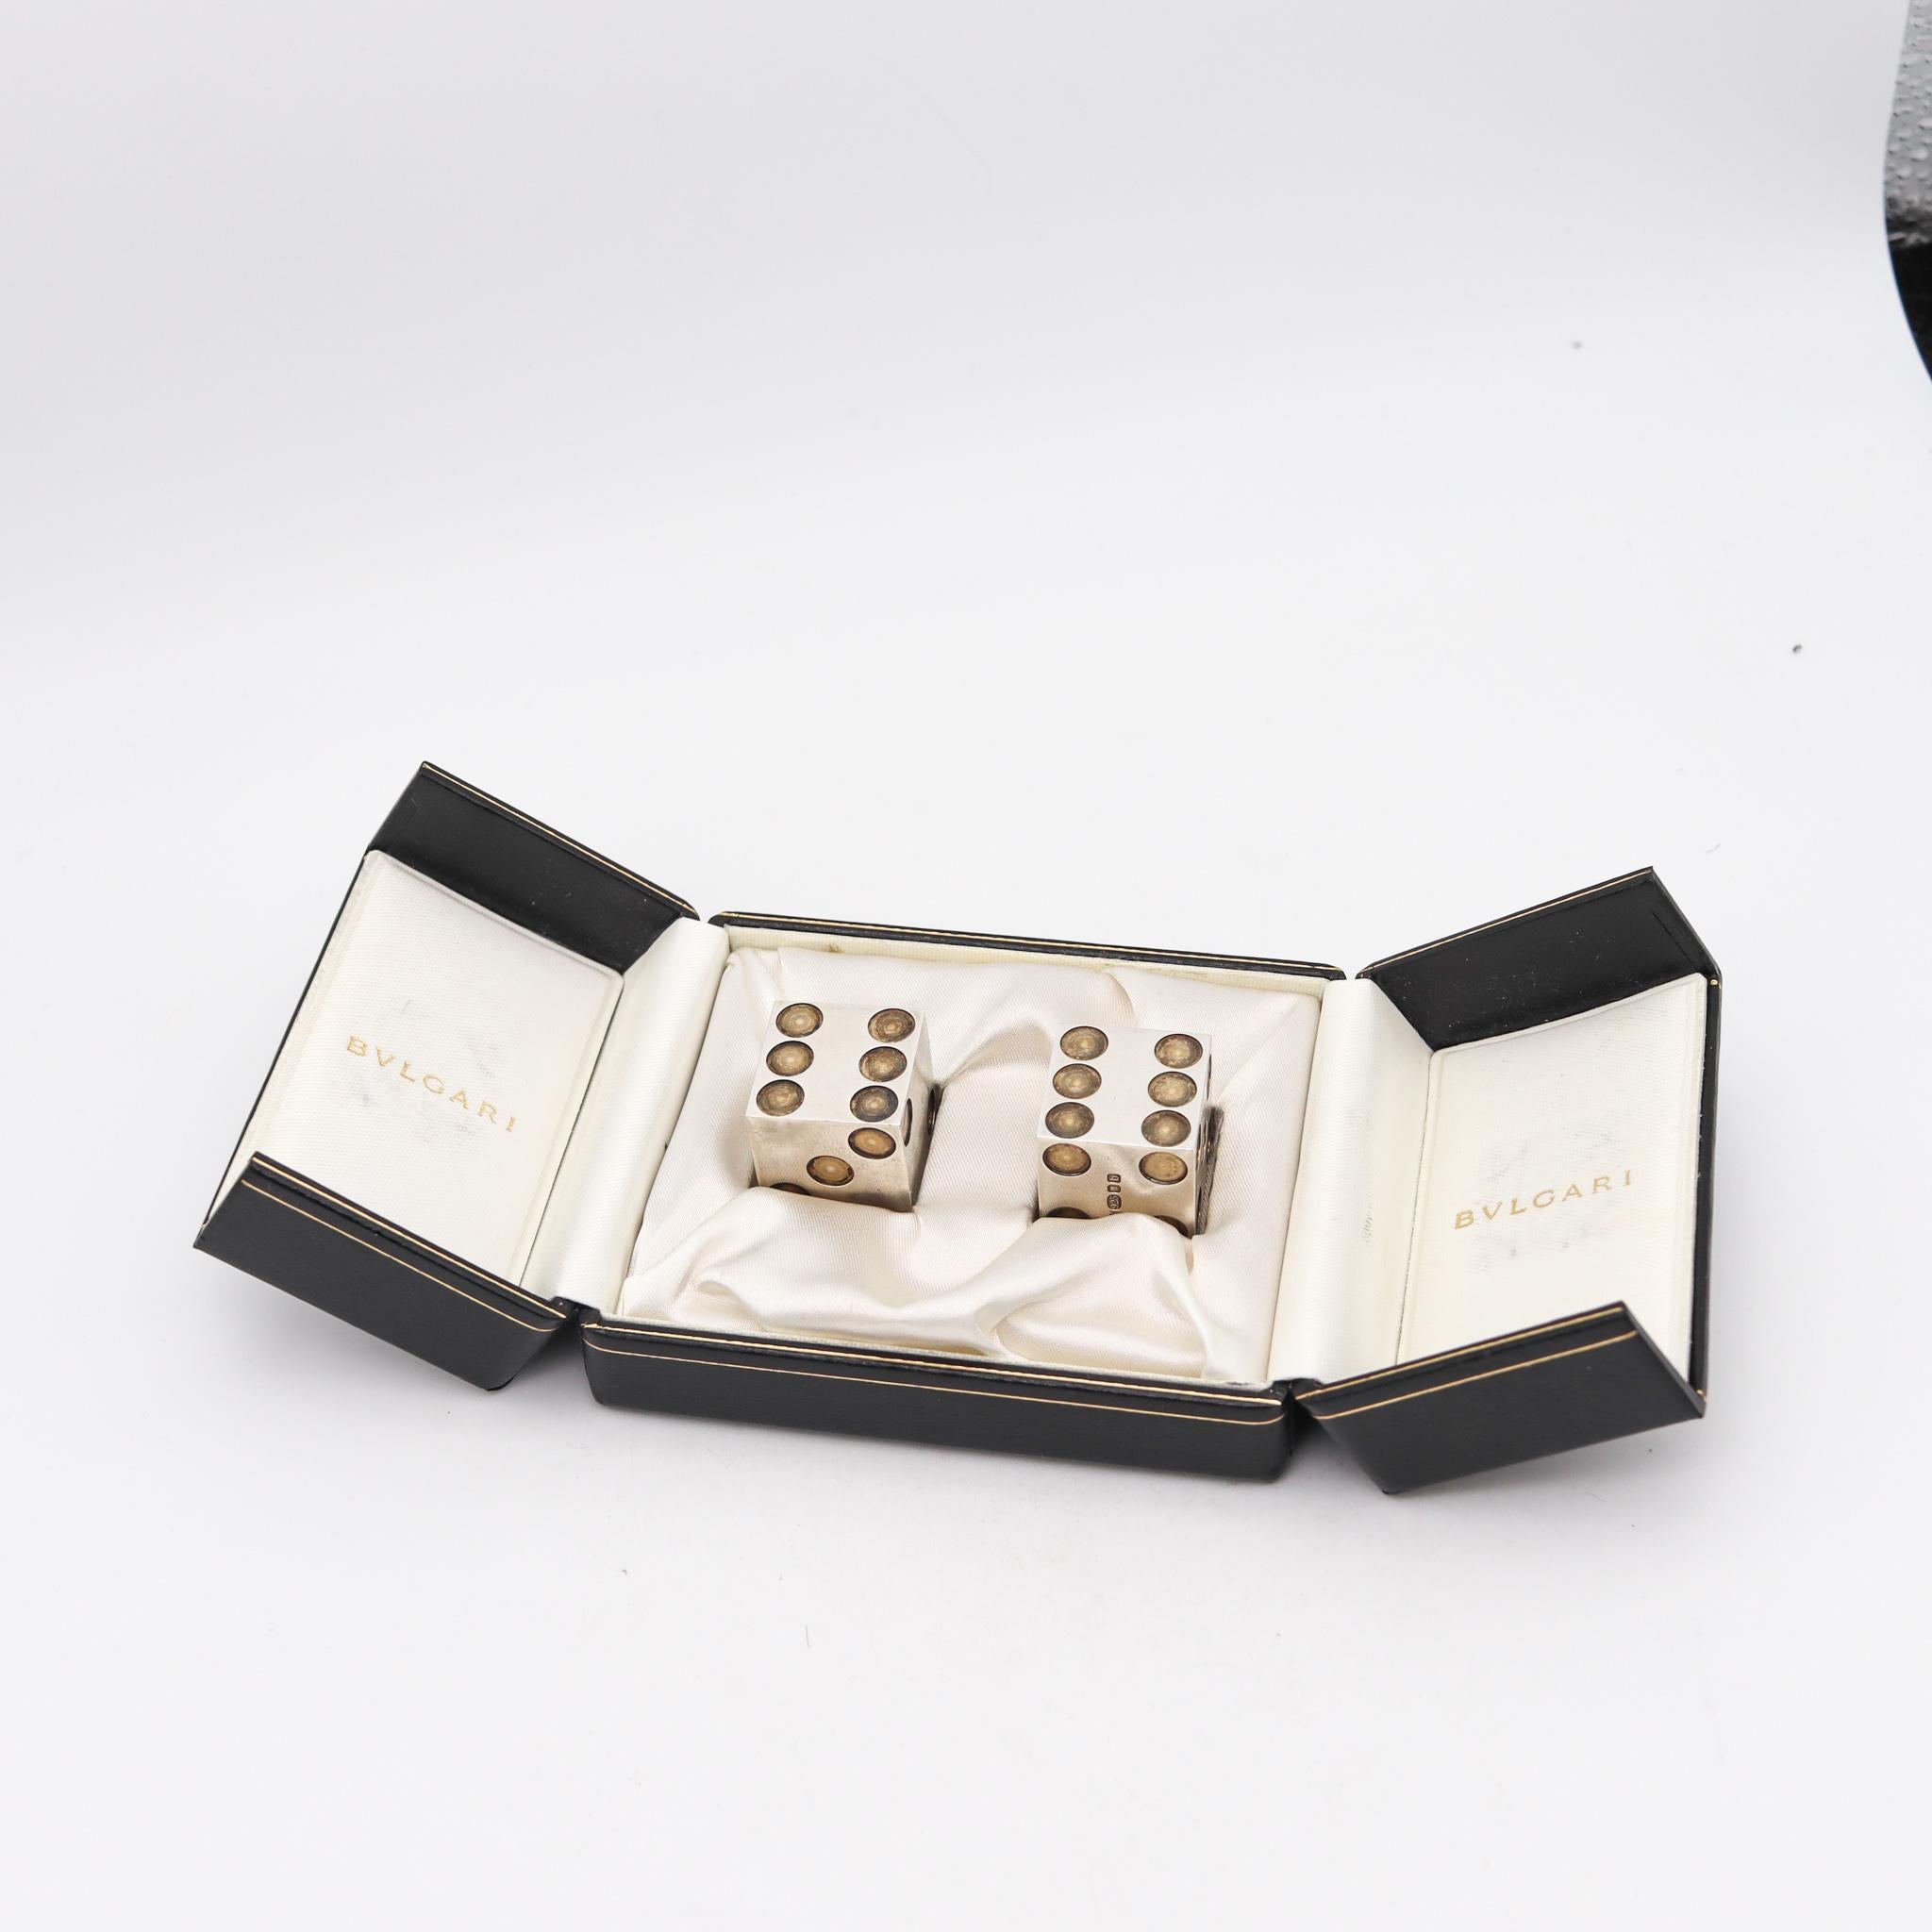 Pair of dices designed by Bvlgari.

Very rare, unusual and a great opportunity to own this pair of highly collectible Bvlgari sterling silver dices set. It is a perfect gift for the collector or gambler who has it all. They are hallmarked with